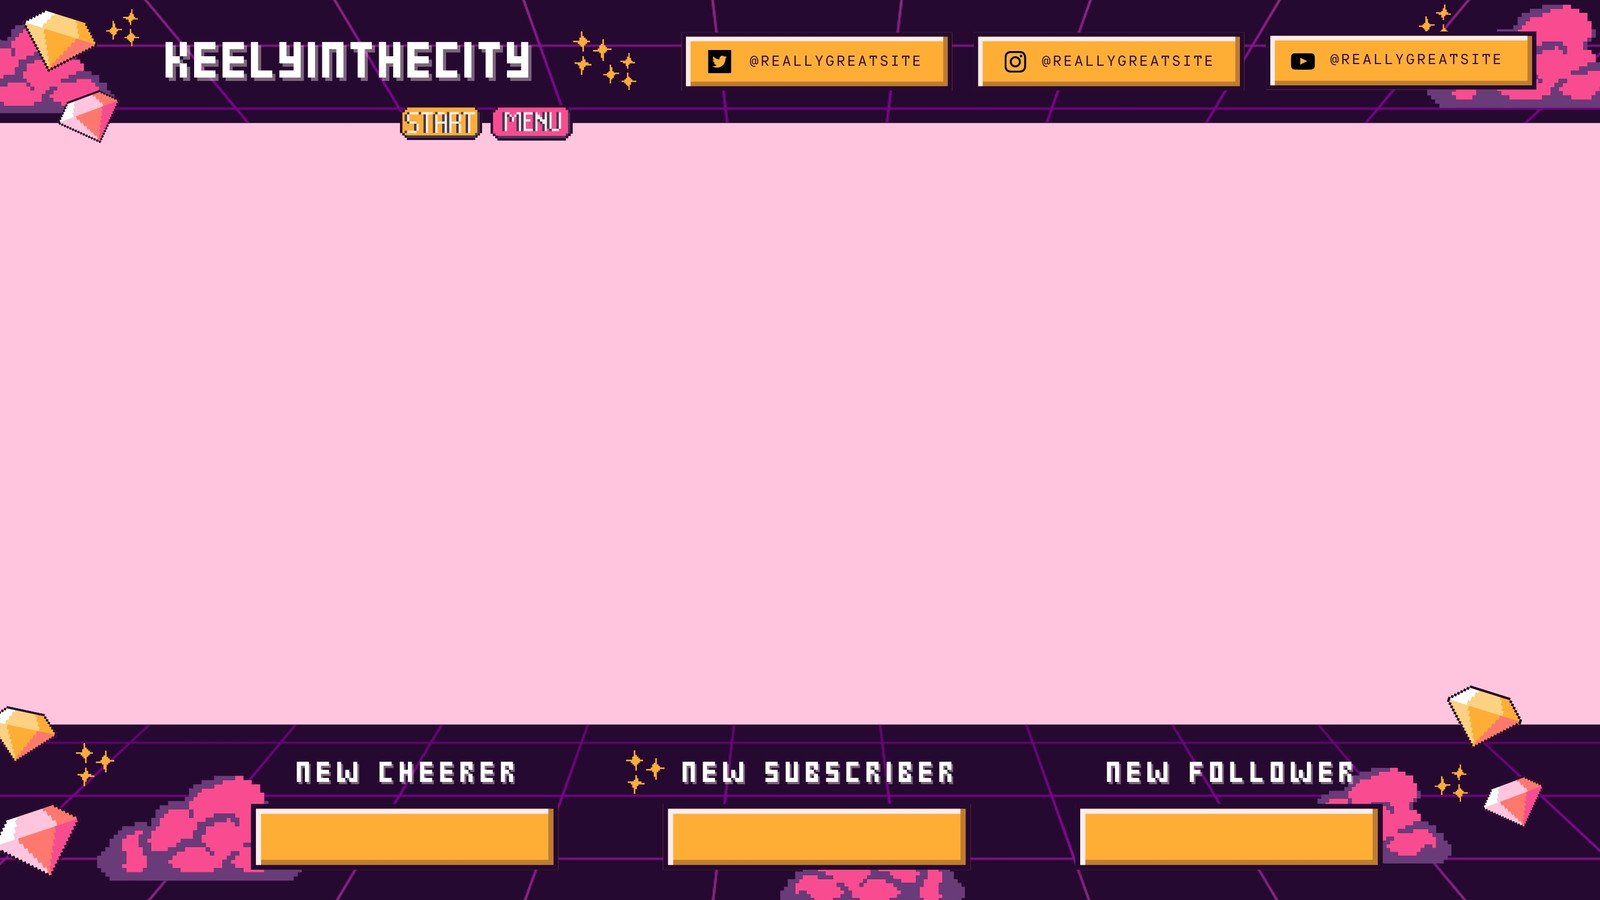 Placeit - Laser-Themed Twitch Overlay Template for a Just Chatting